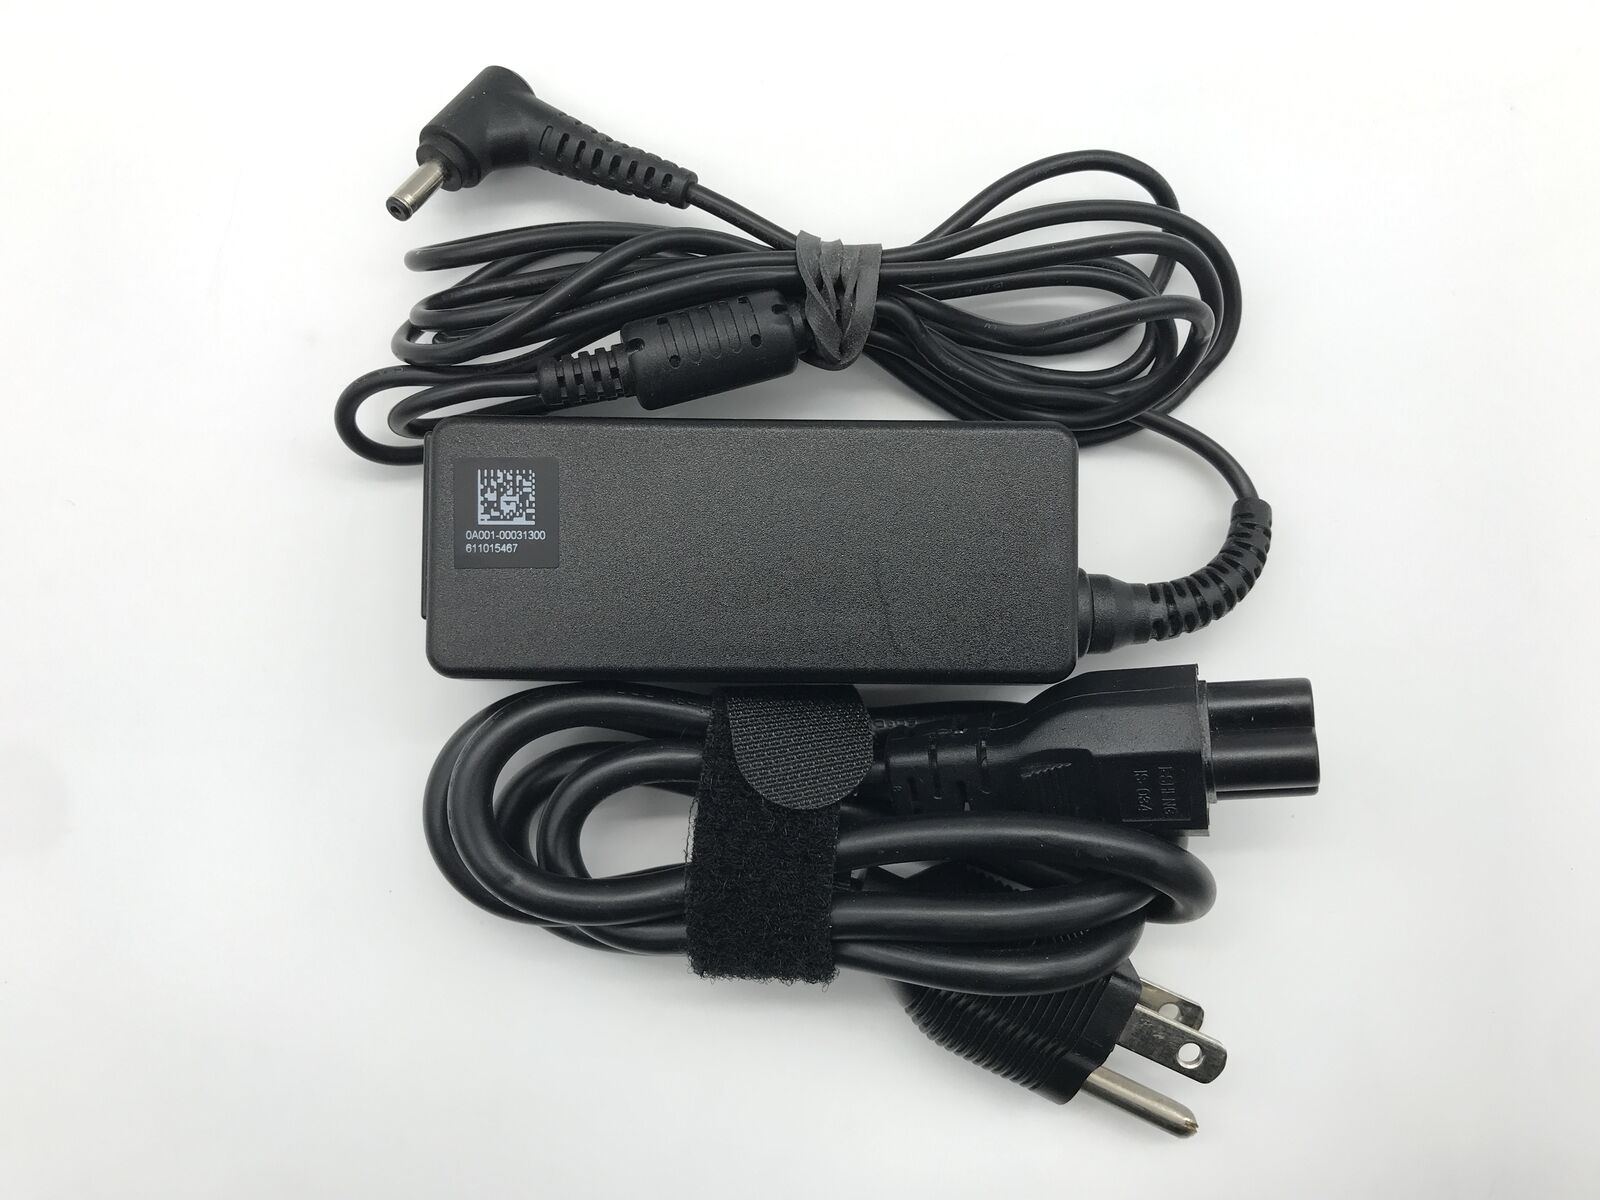 Genuine Asus Laptop Charger AC Adapter Power Supply C202S Chromebook ADP-40KD BB